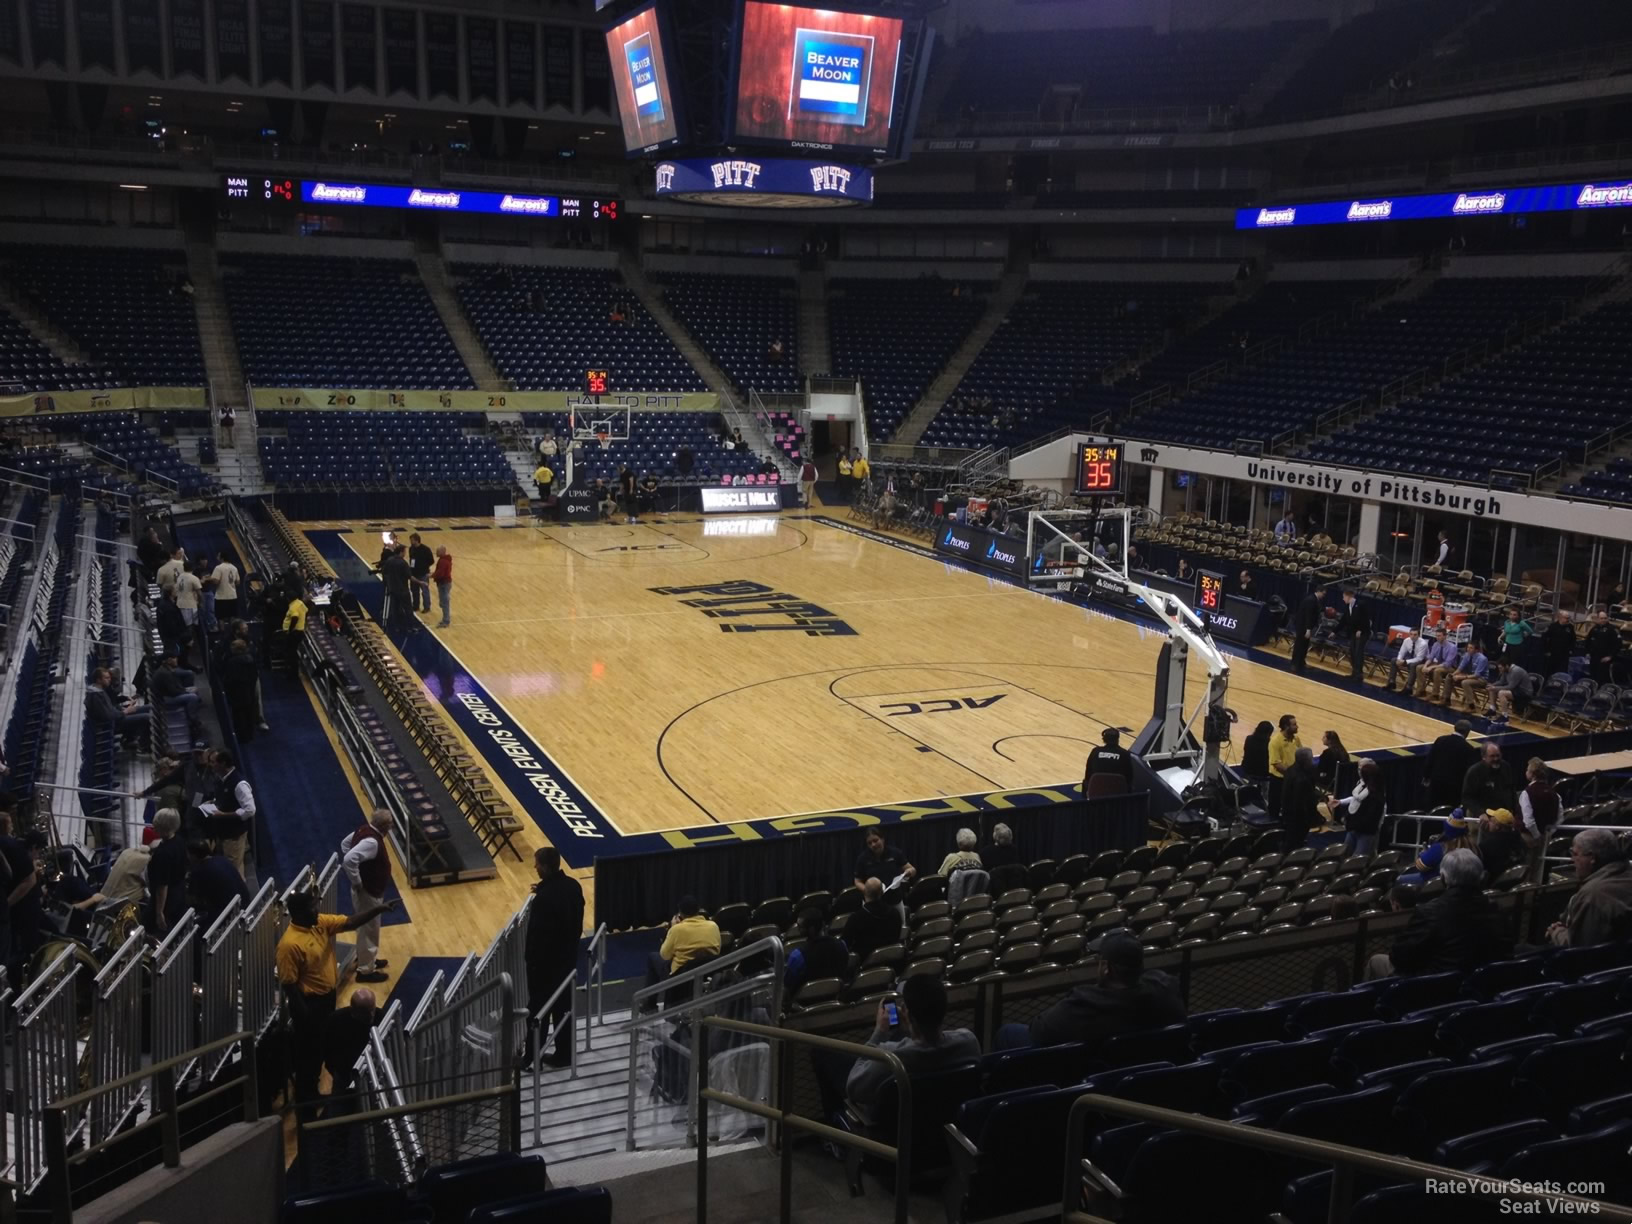 section 103, row n seat view  - petersen events center